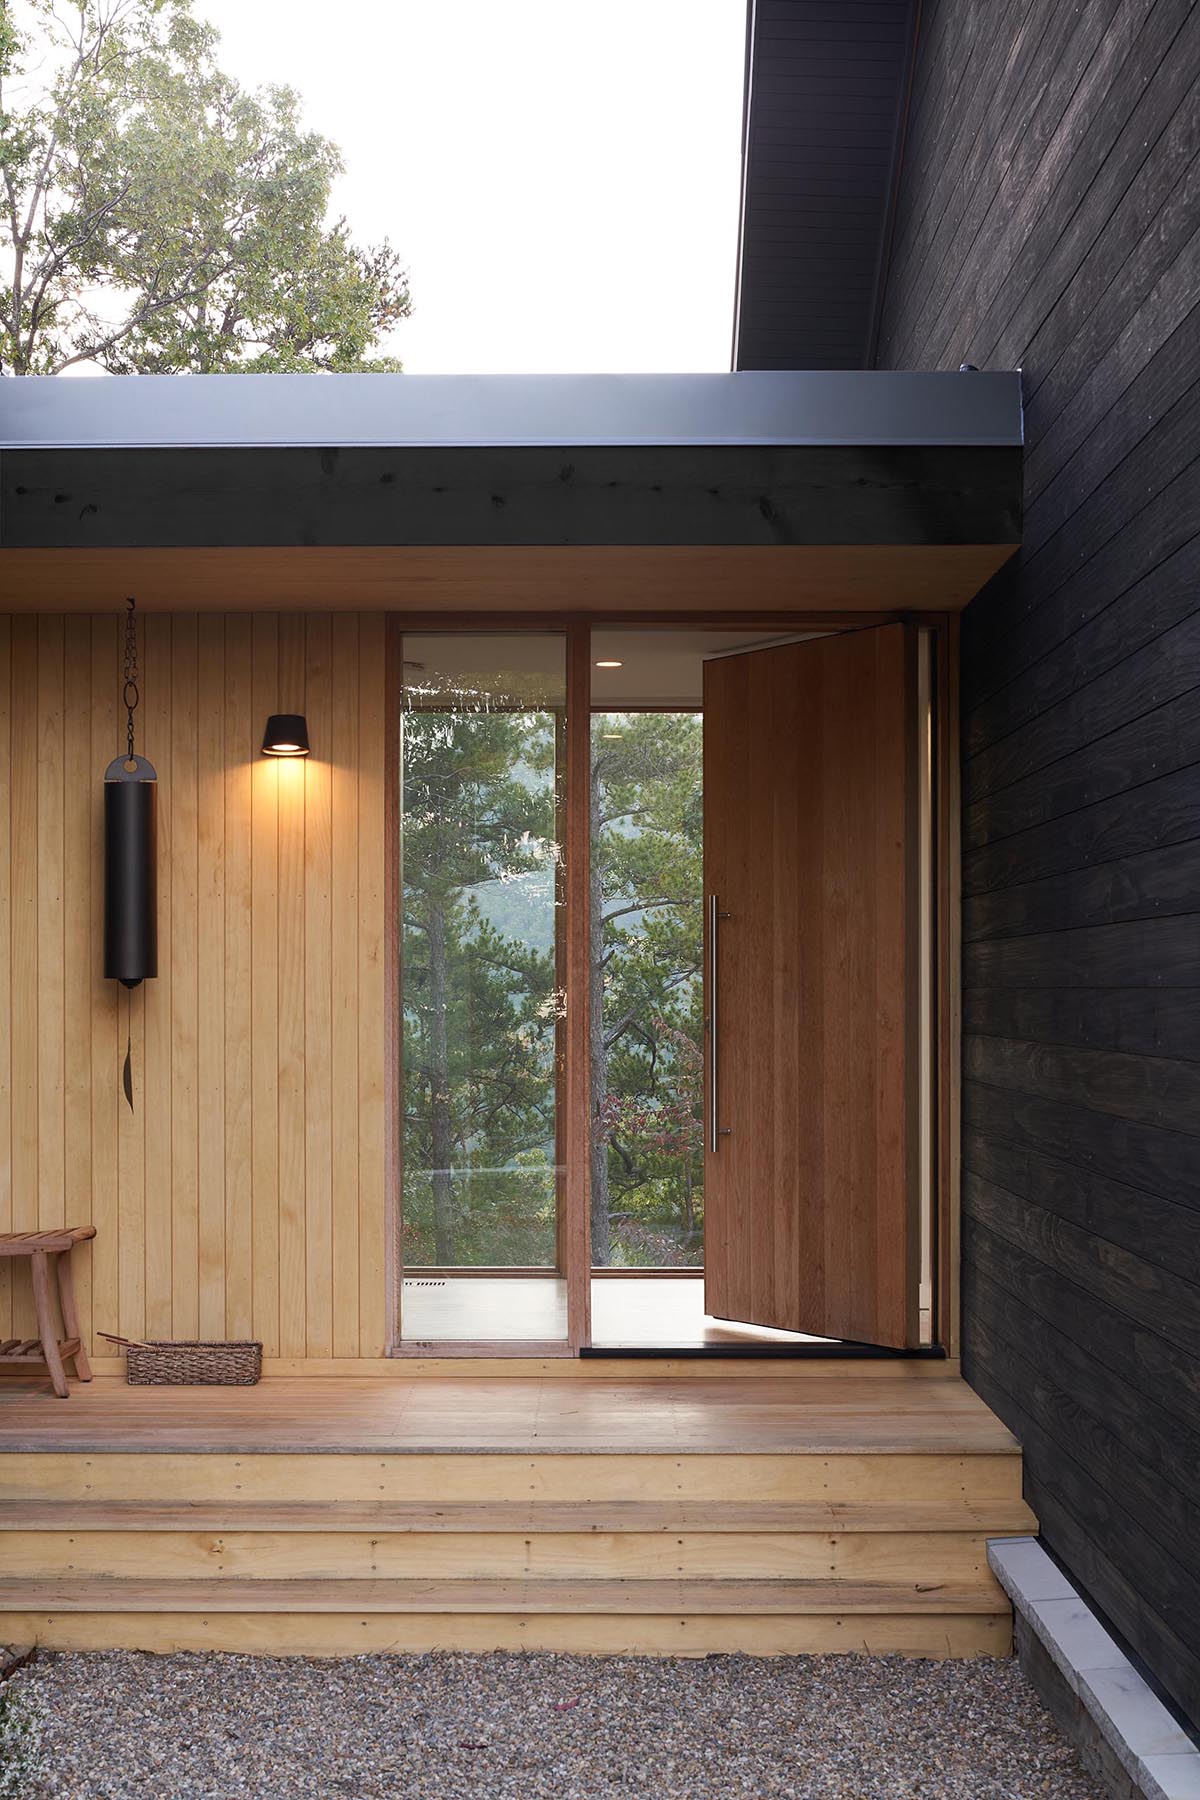 A modern home with burnt wood siding and alcoves lined with contrasting light wood.